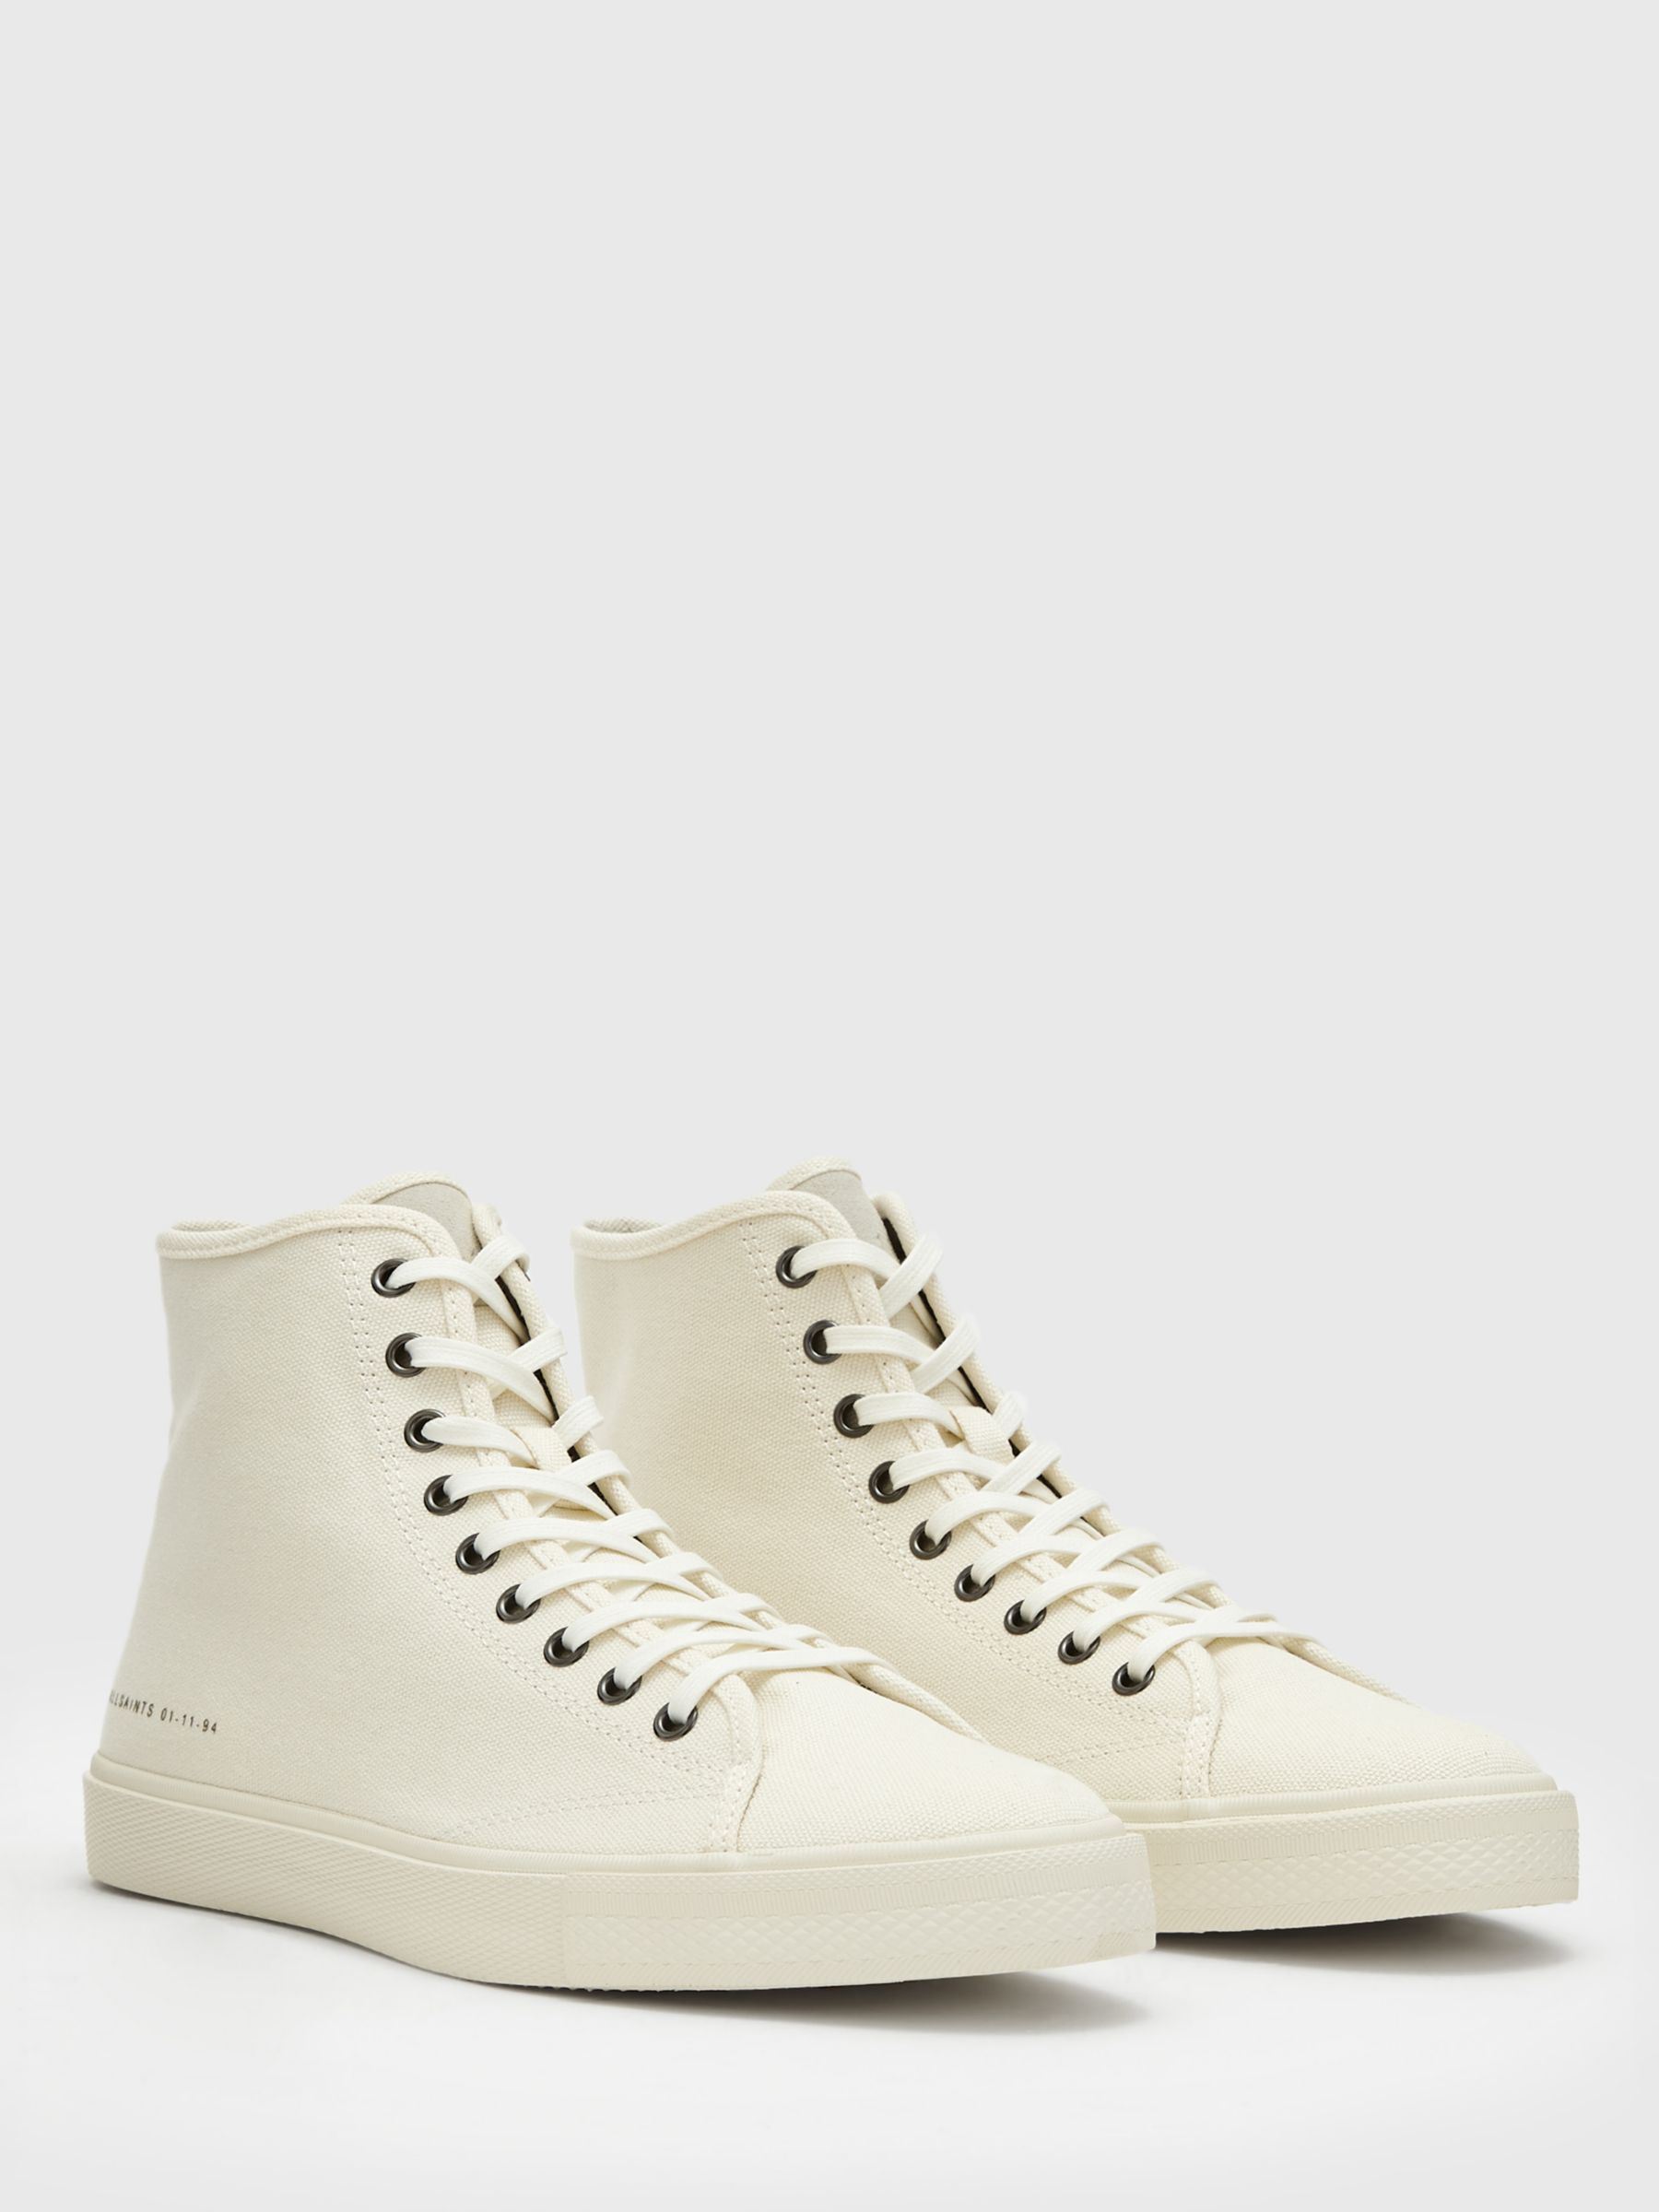 Buy AllSaints Bryce Canvas High Top Trainers Online at johnlewis.com